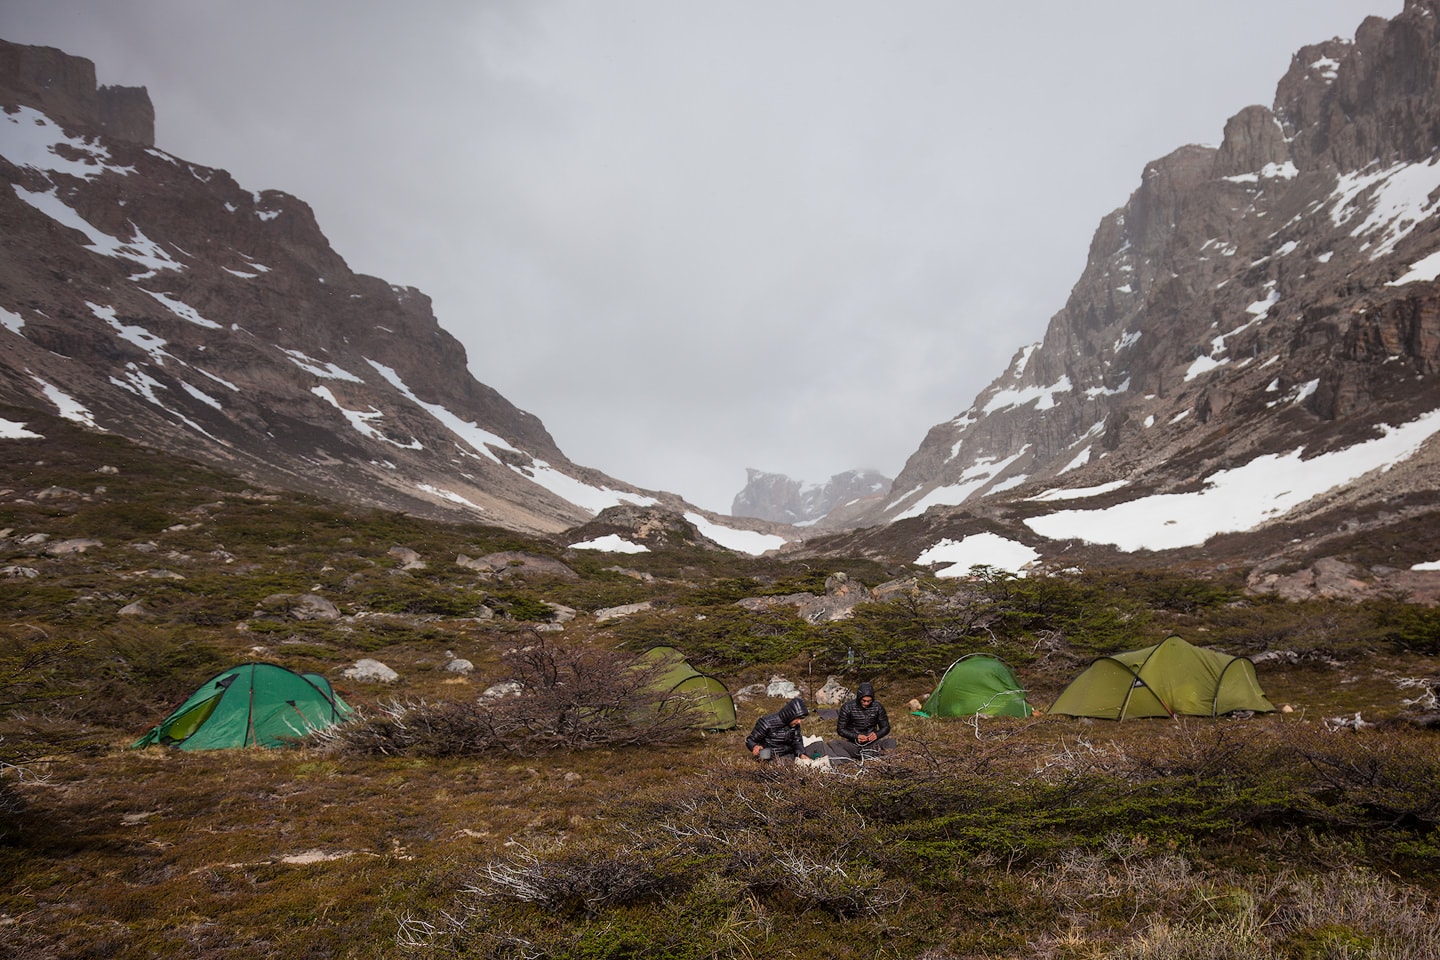 Hikers having breakfast in front of their tents.